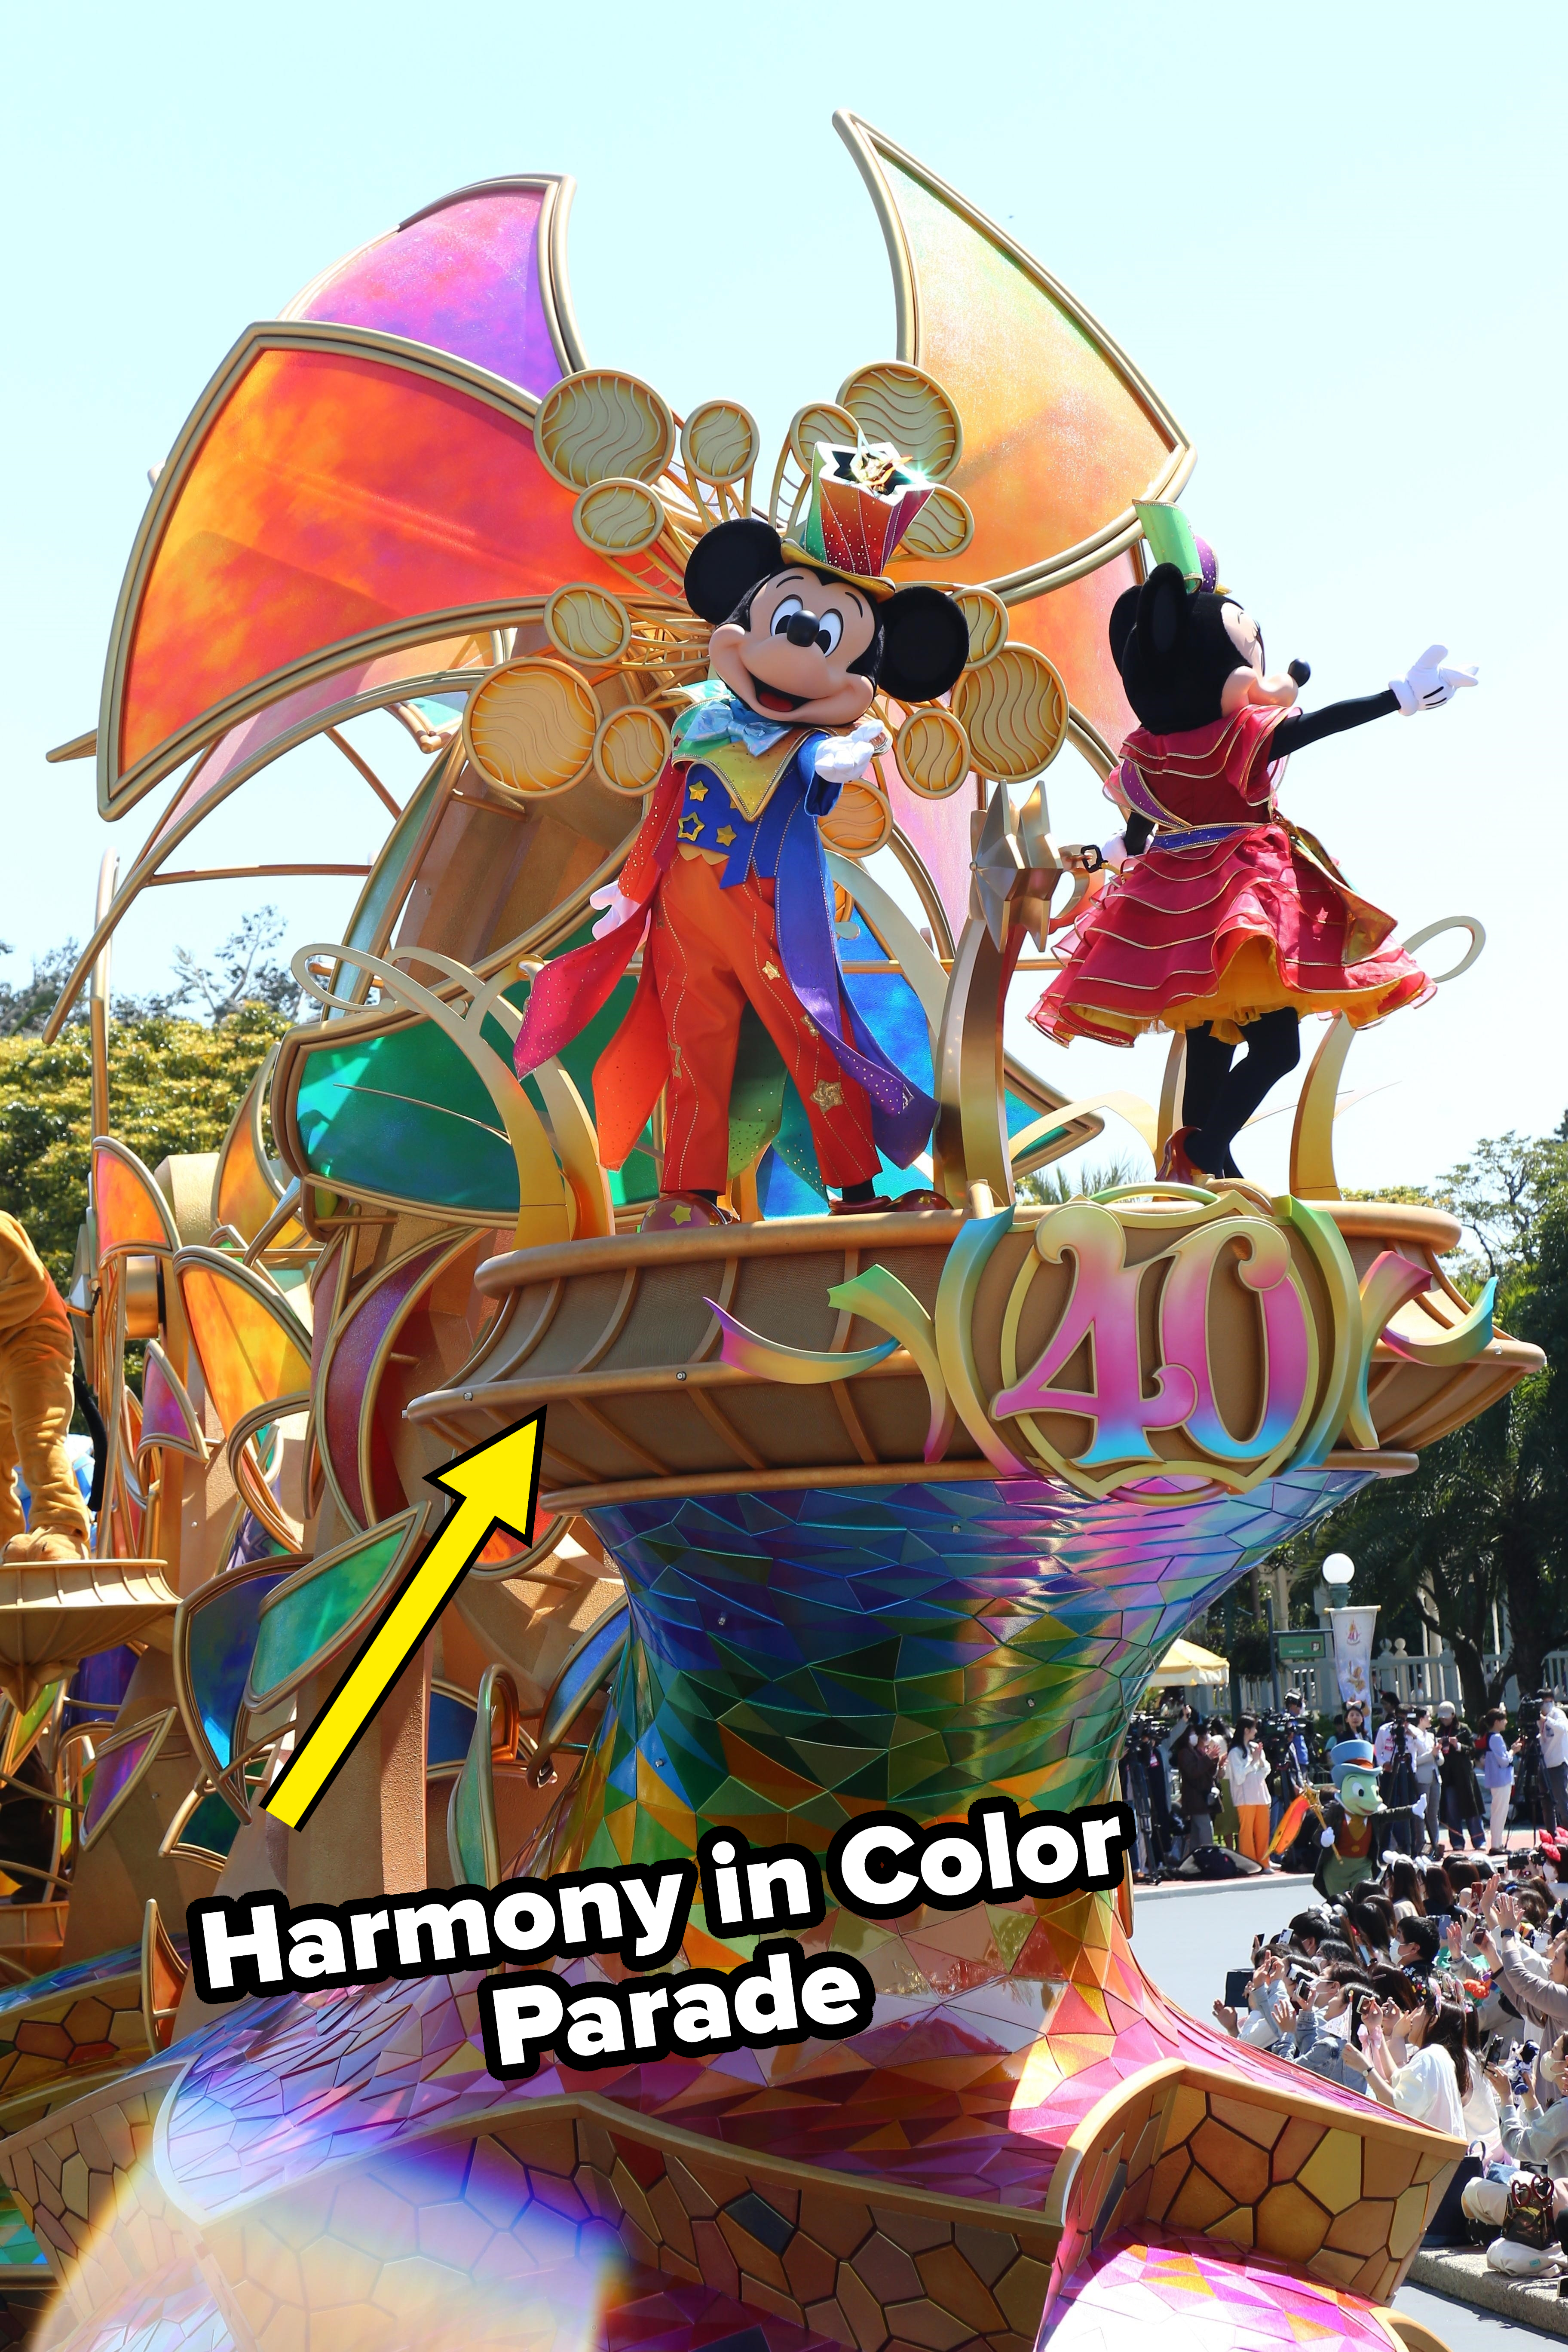 Mickey Mouse, dressed as a magician, waves atop a colorful float celebrating the 40th anniversary of Tokyo Disneyland. Minnie Mouse stands beside him in a red outfit